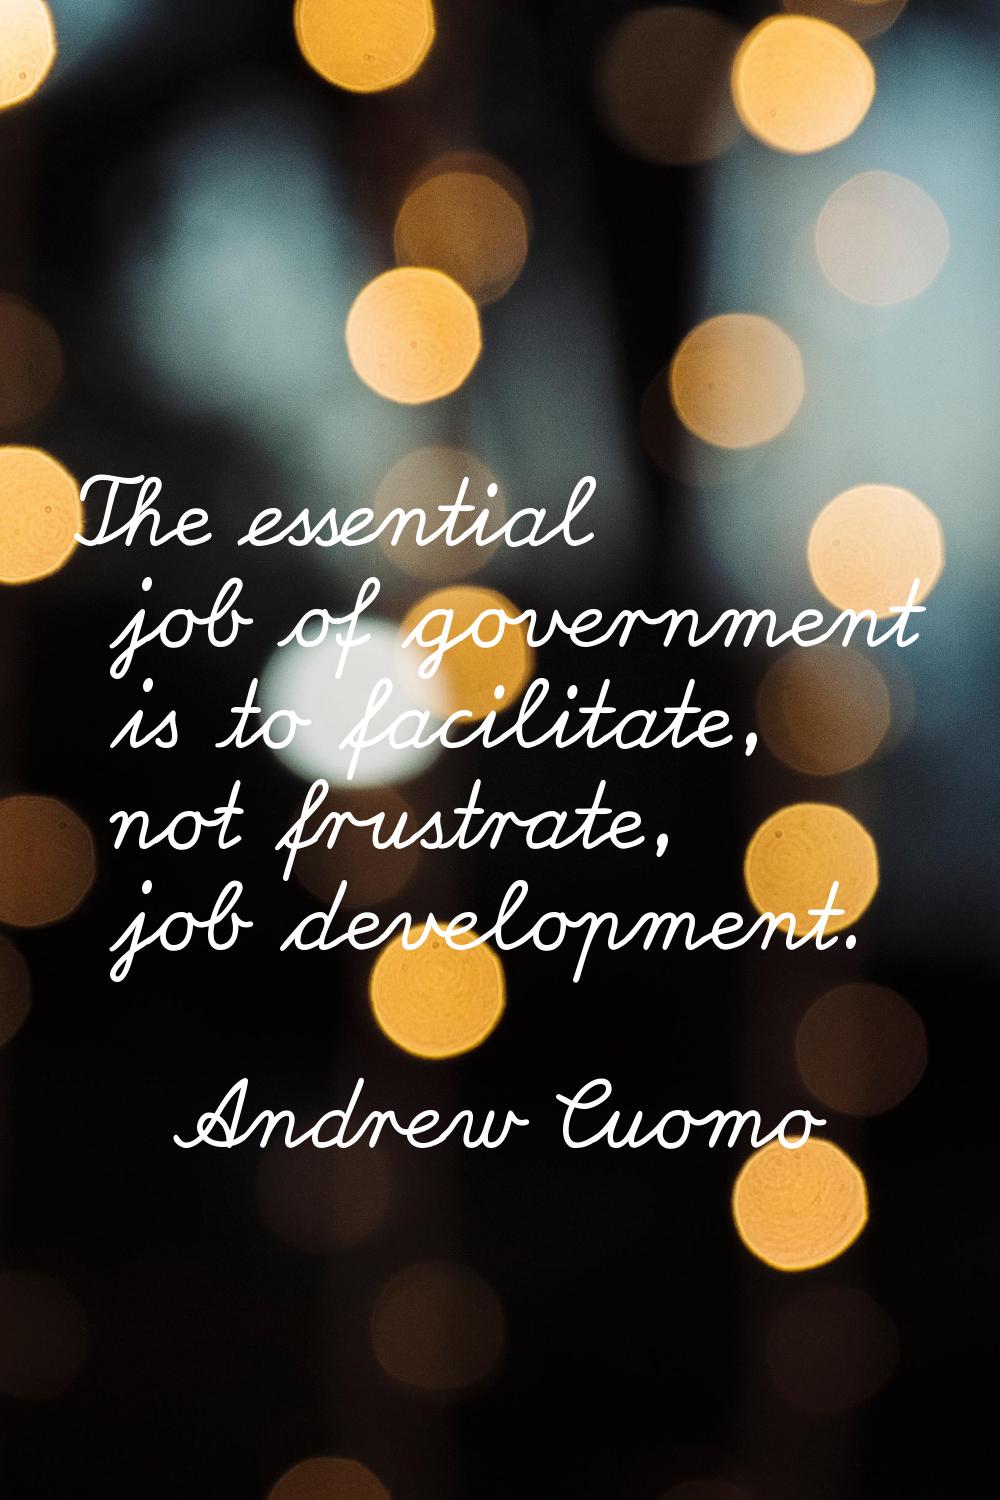 The essential job of government is to facilitate, not frustrate, job development.